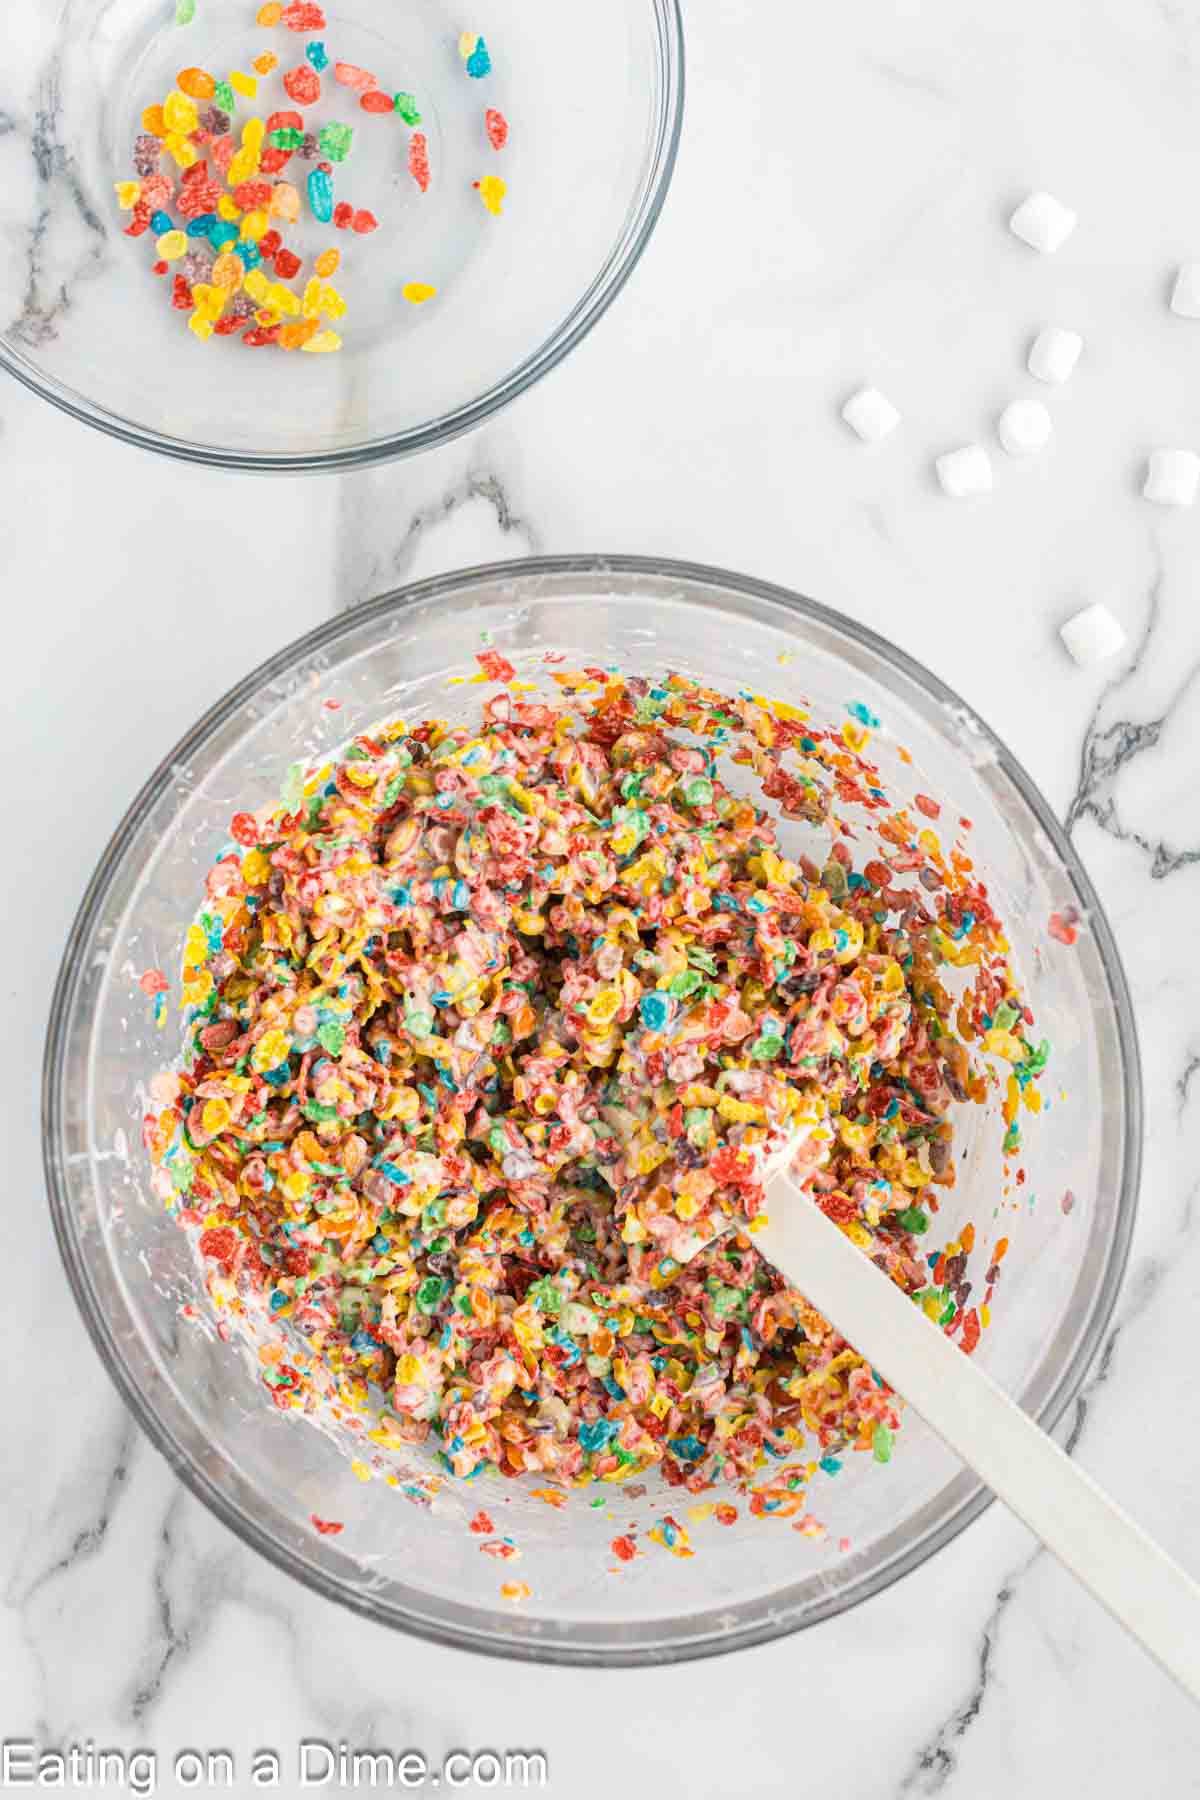 Combining the melted marshmallow mixture with the cereal in a bowl with a spatula